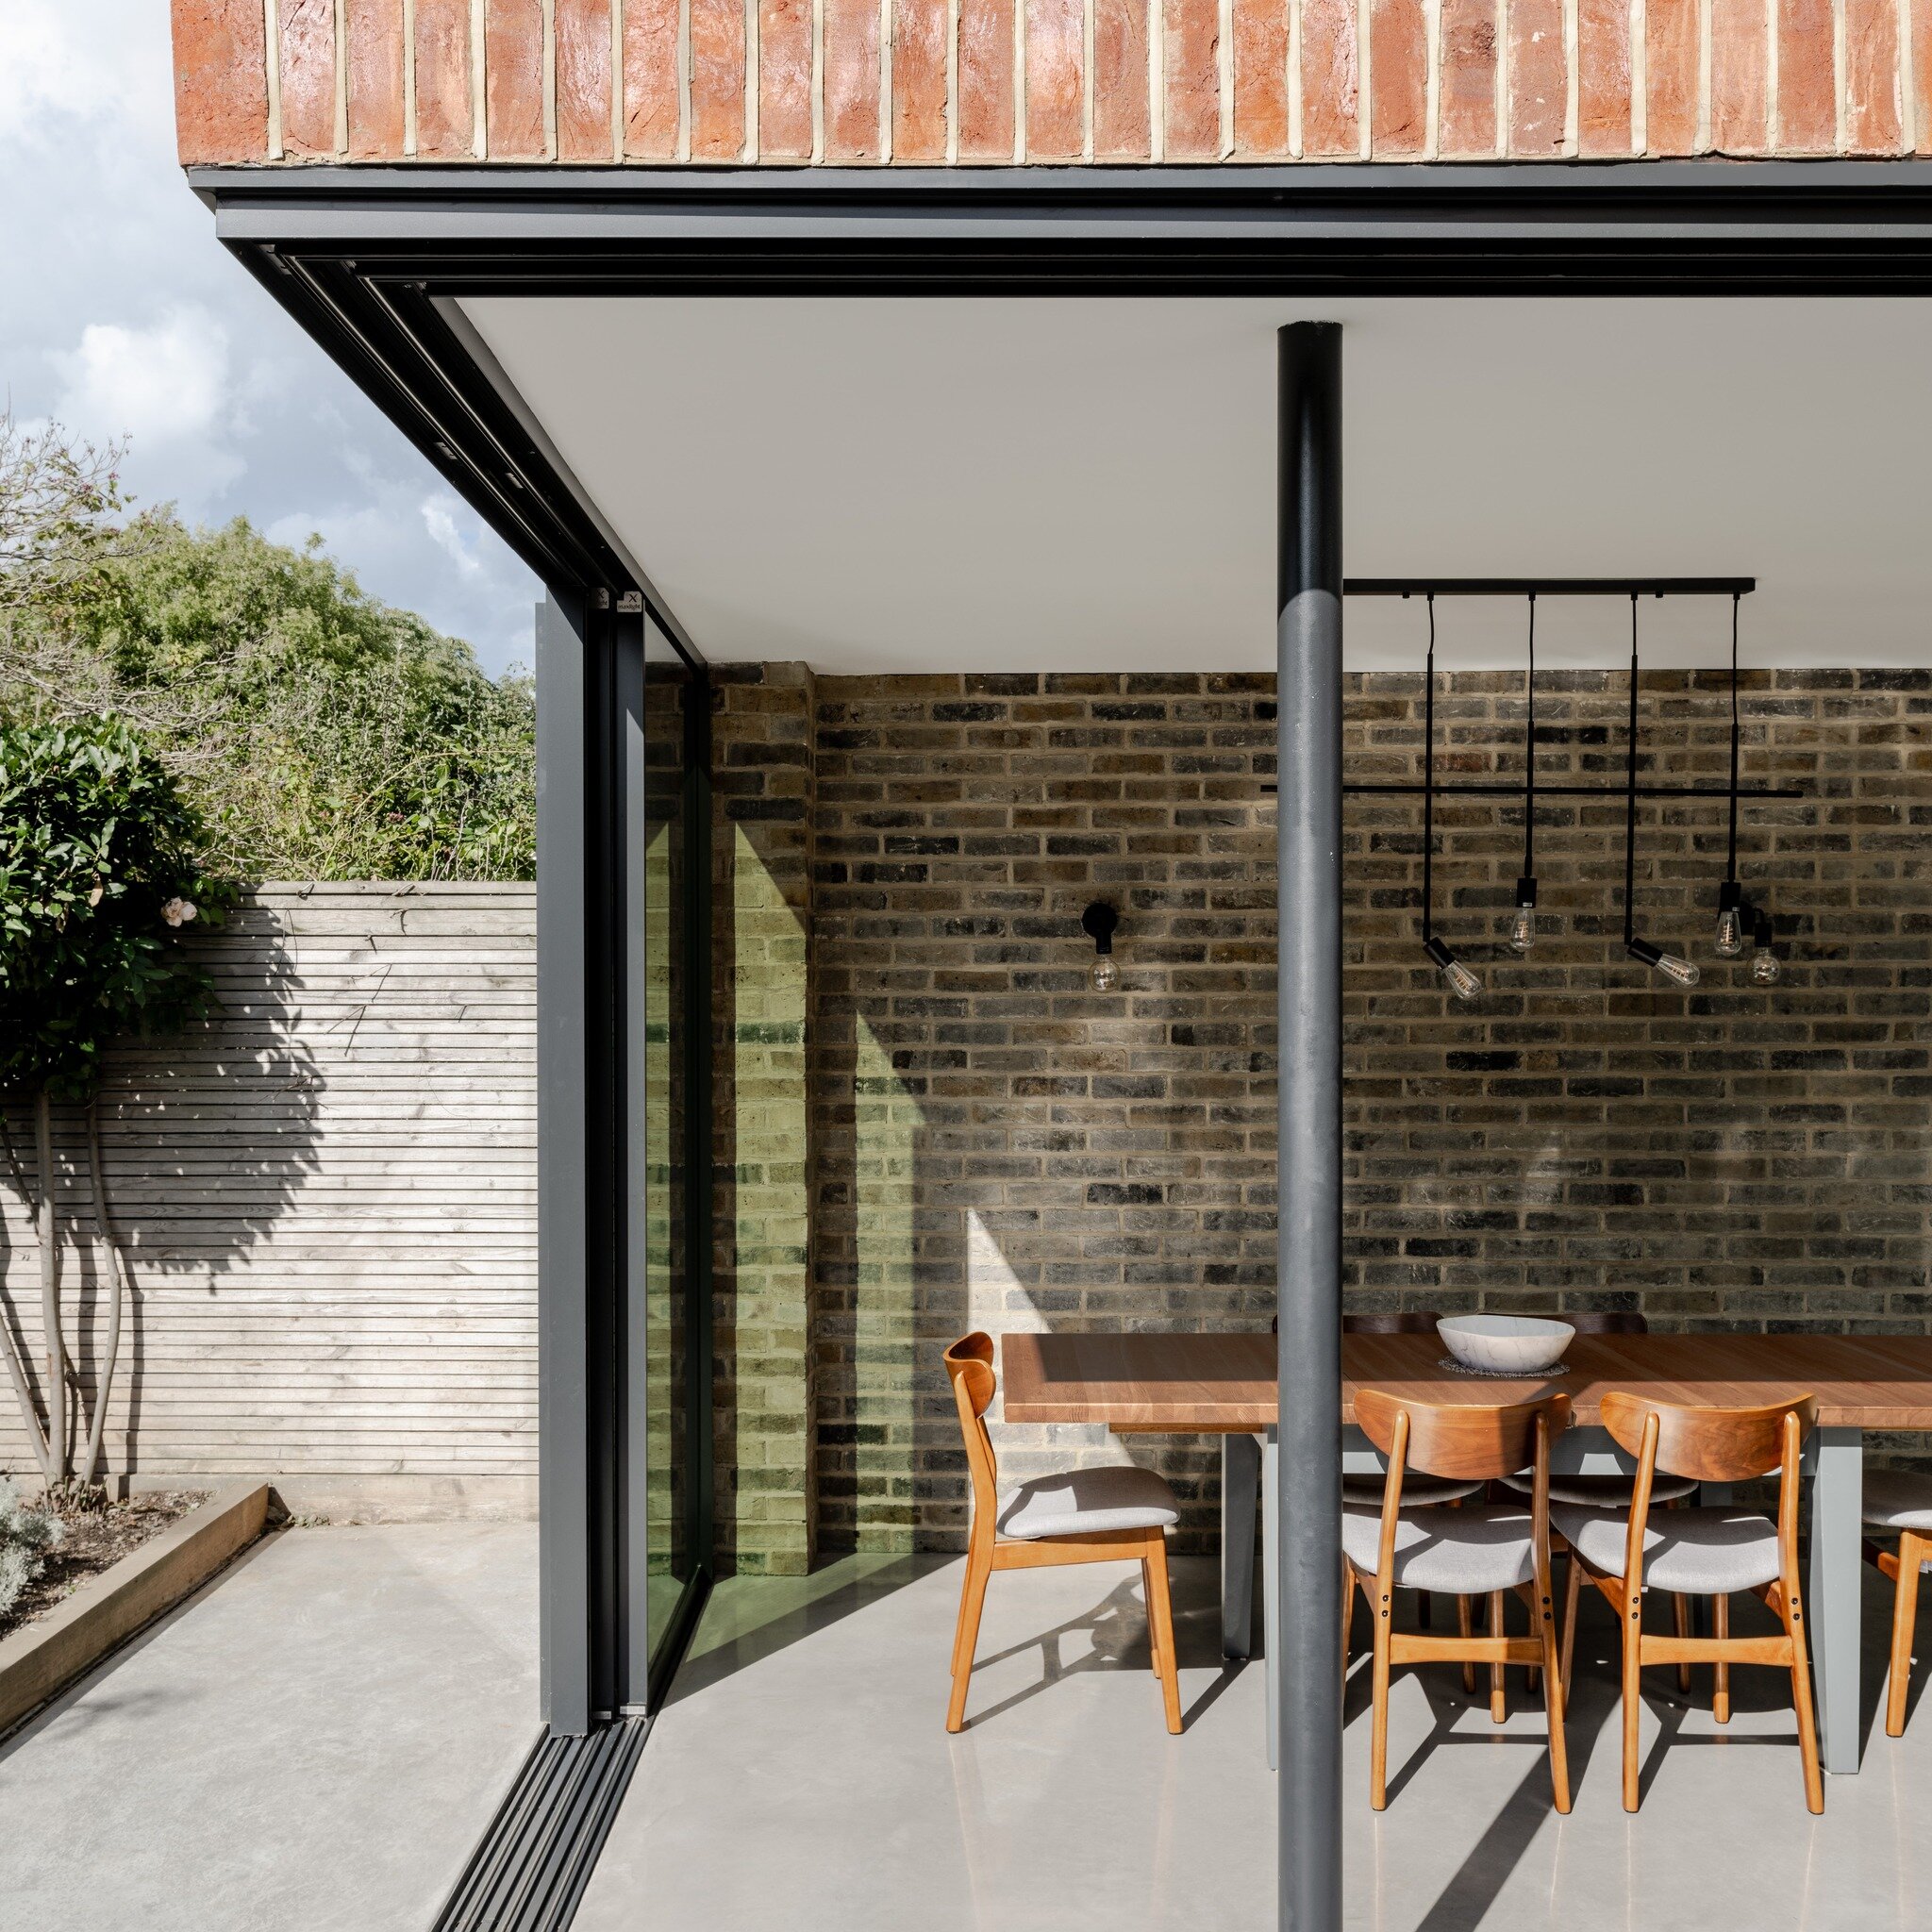 With a modest sized garden the goal was to retain as much grass as possible🌾

Our rear extension in Dulwich houses a new dining area with a glazed opening corner. Not only does this create a 'wow-factor' but when entertaining during the summer, our 